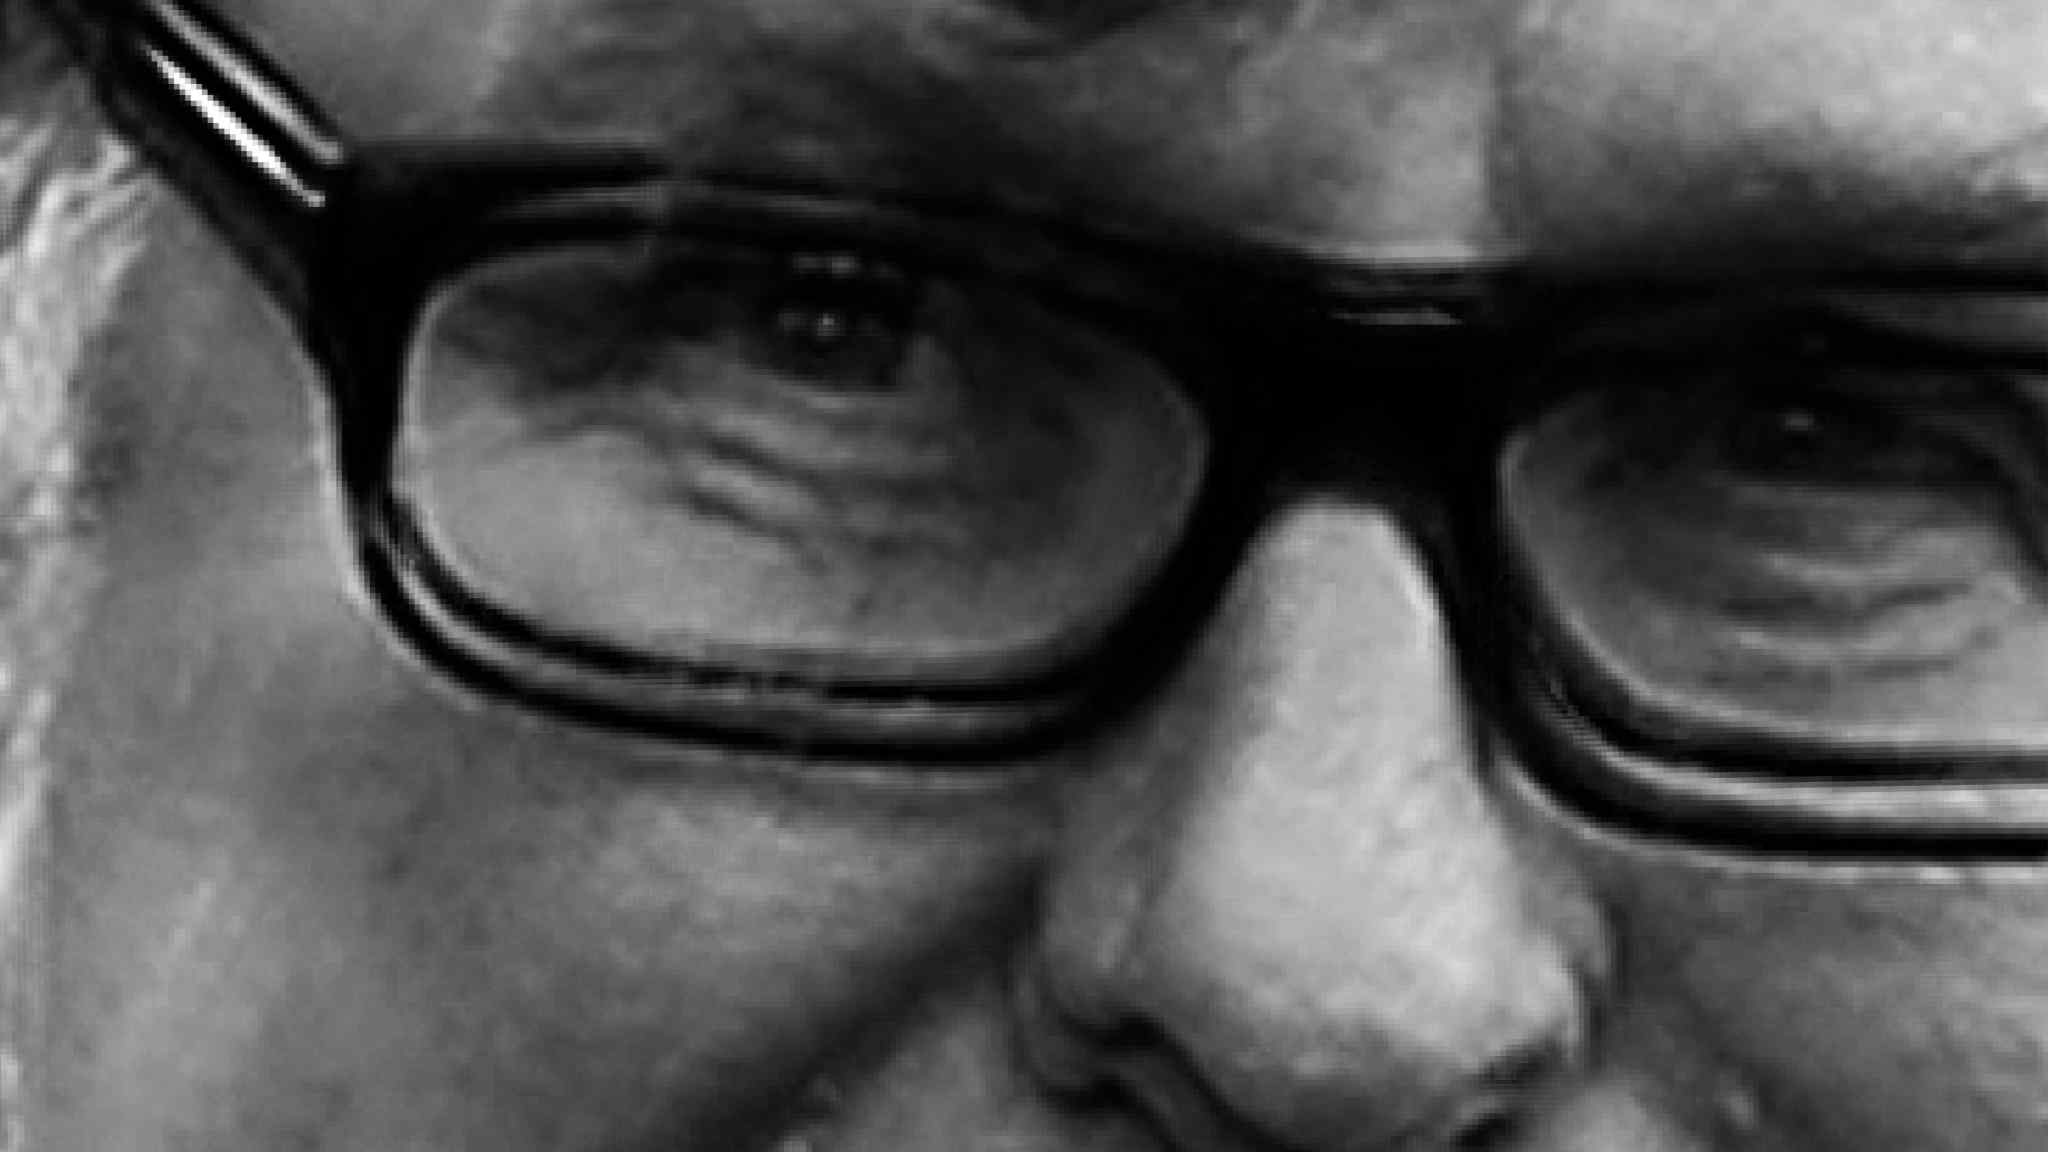 How Crispin Odey evaded sexual assault allegations for decades